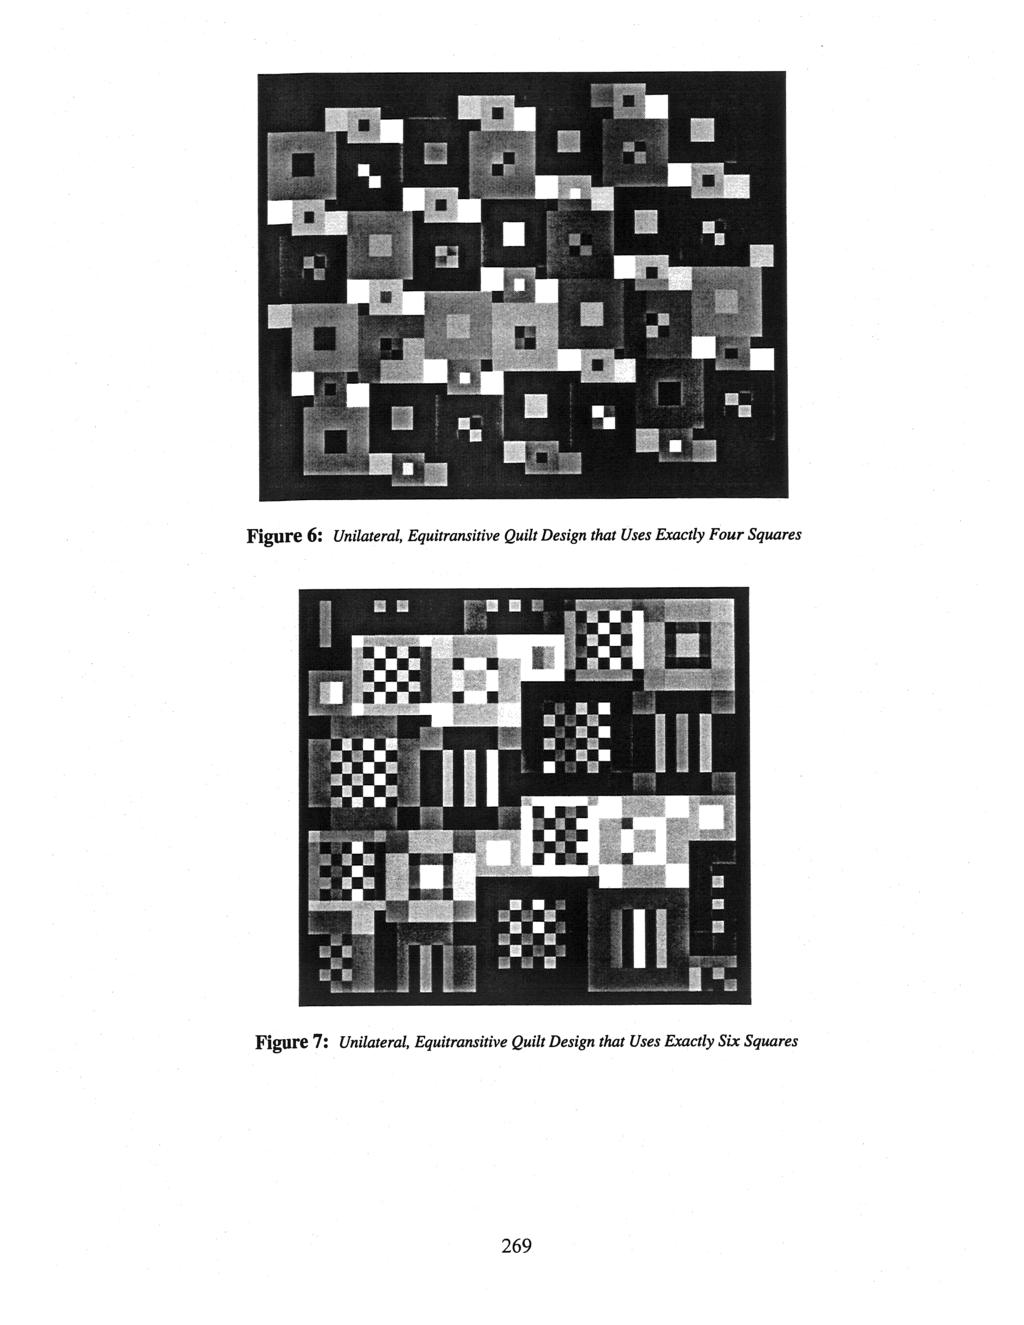 Figure 6: Unilateral, Equitransitive Quilt Design that Uses Exactly Four Squares